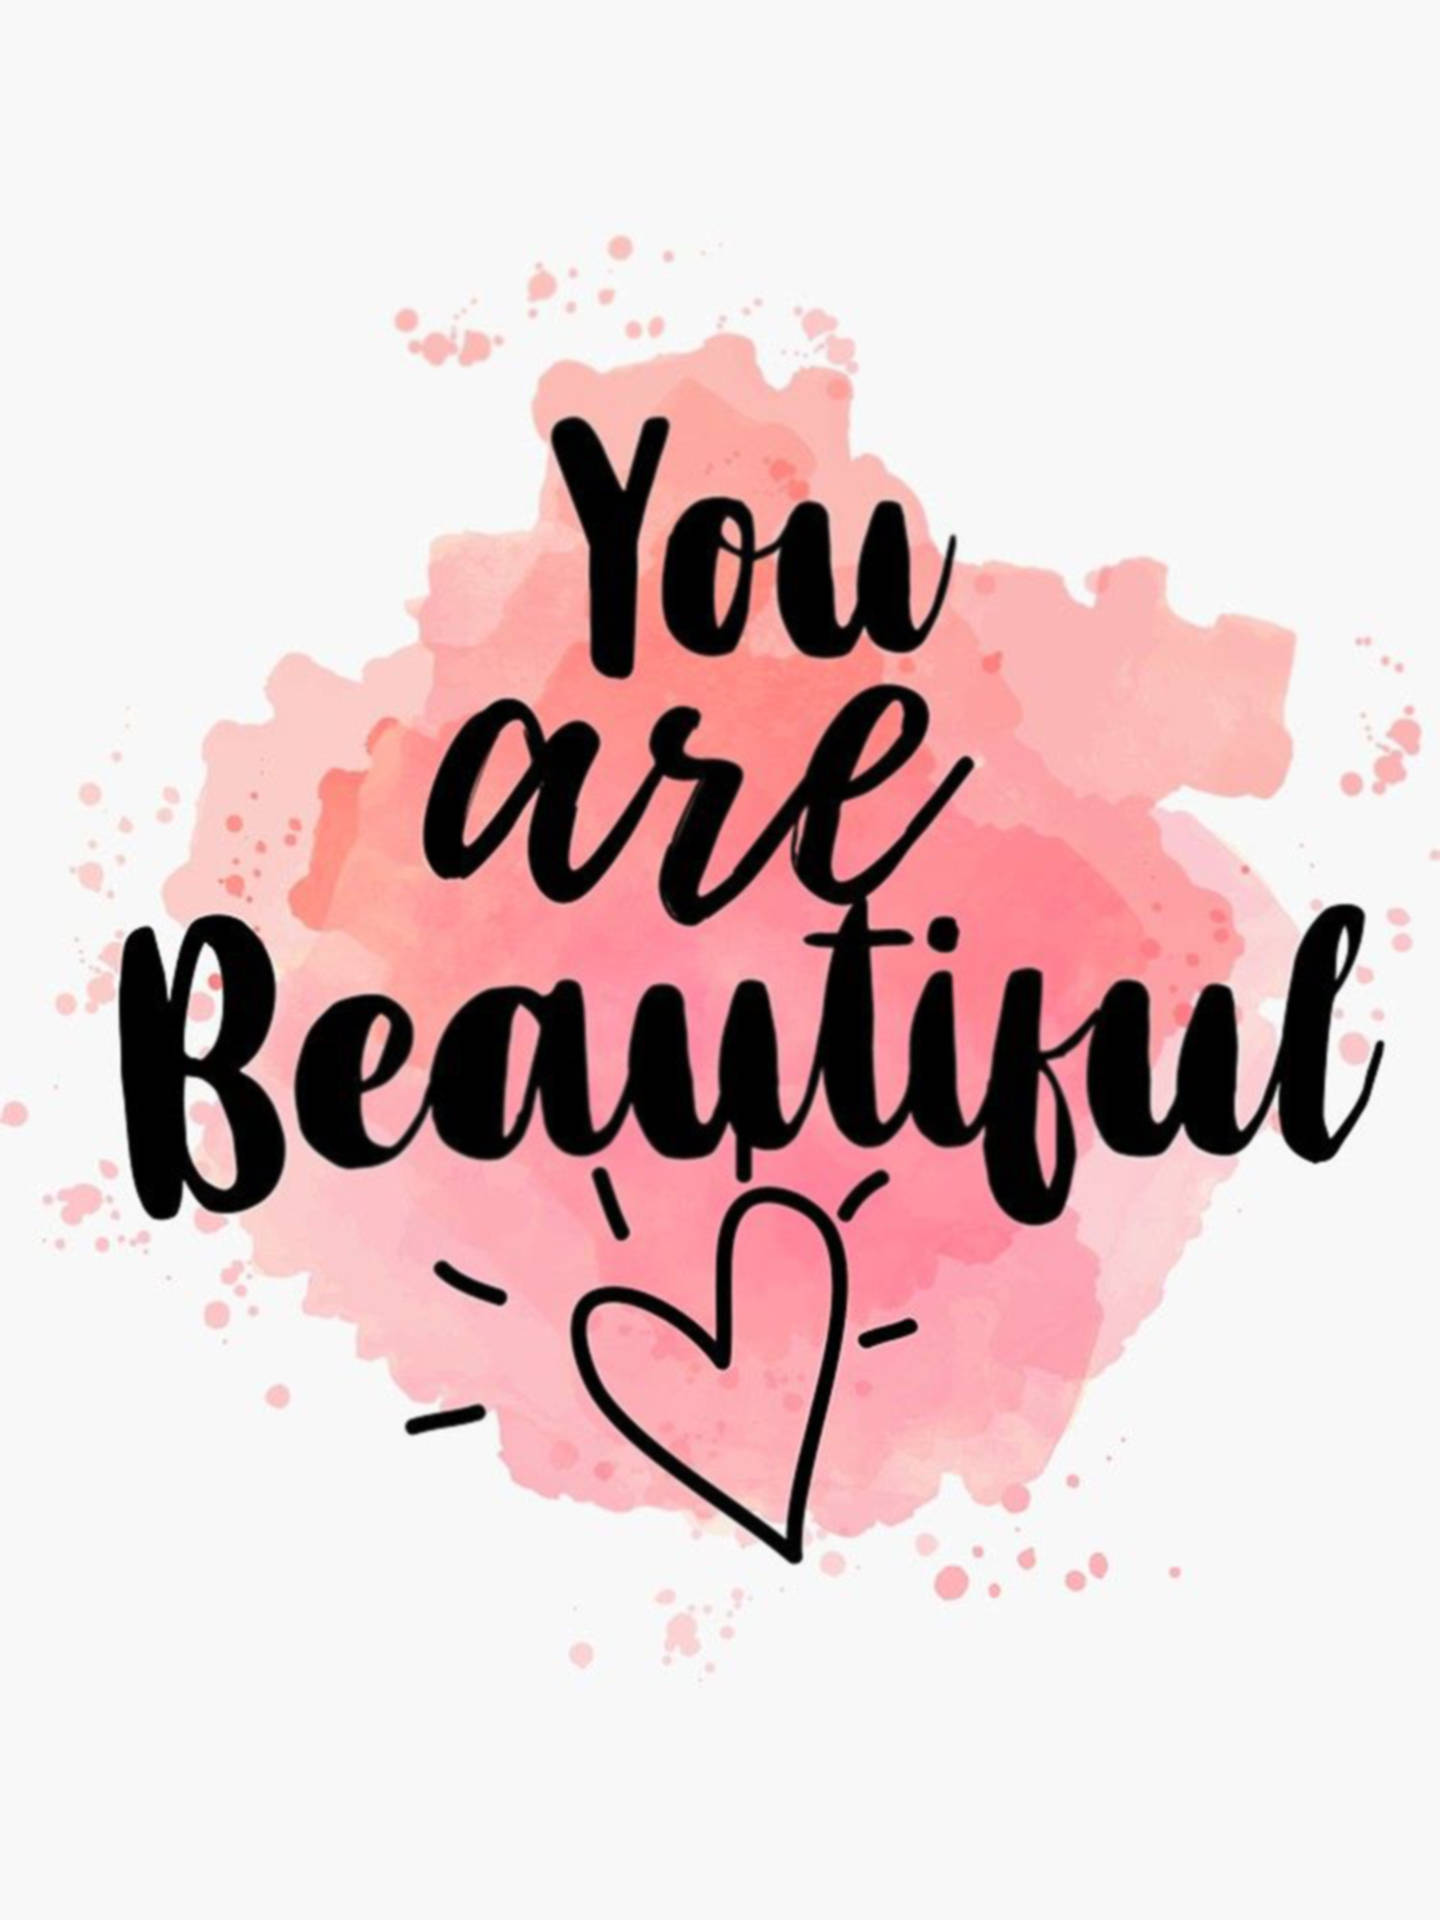 Empowerment Through Affirmation - You Are Beautiful Poster Background